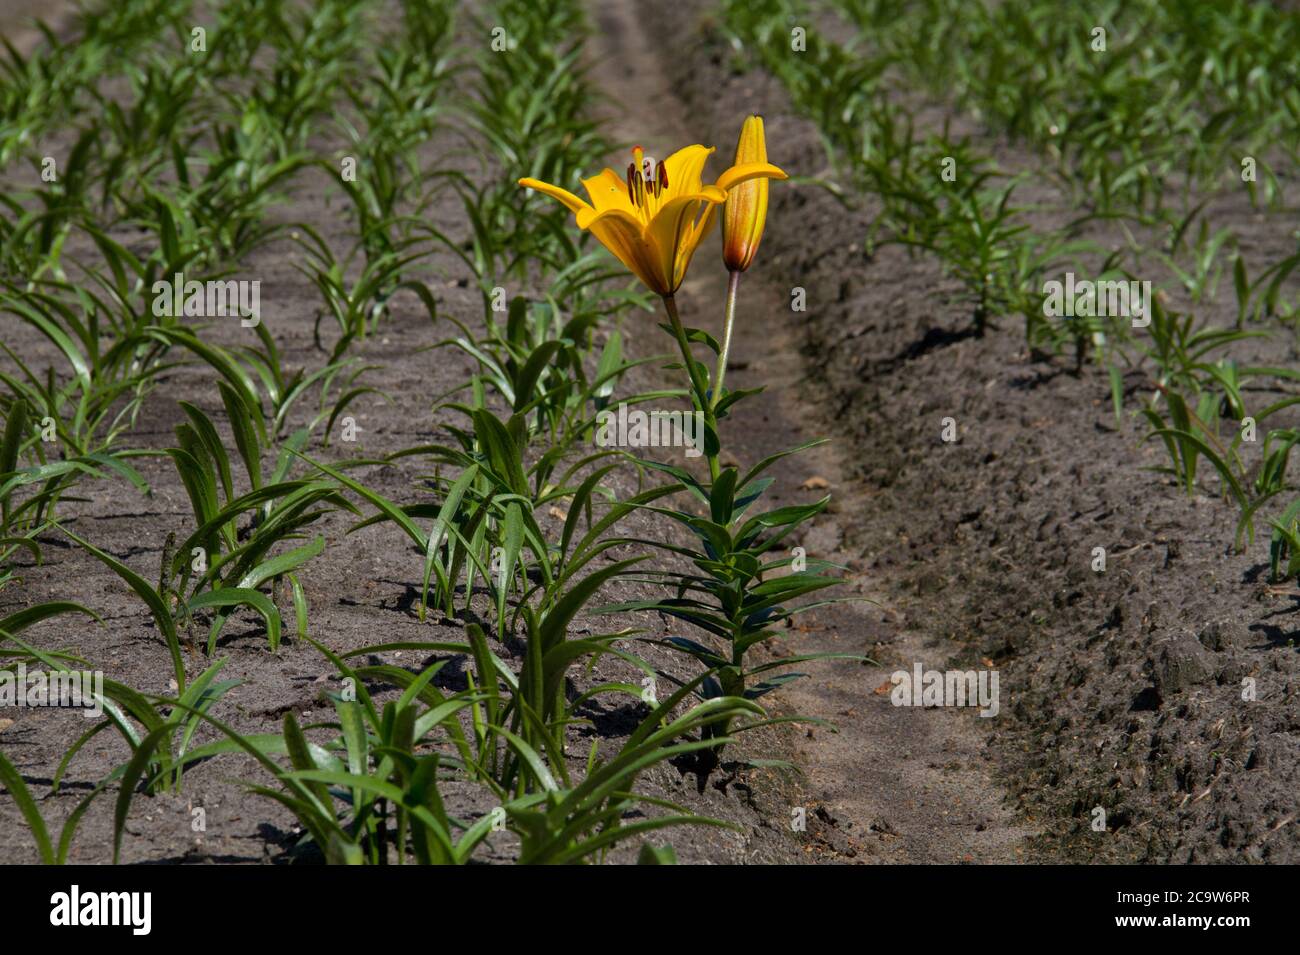 Cultivation of yellow Lilies on humic soil, one of them flowering Stock Photo